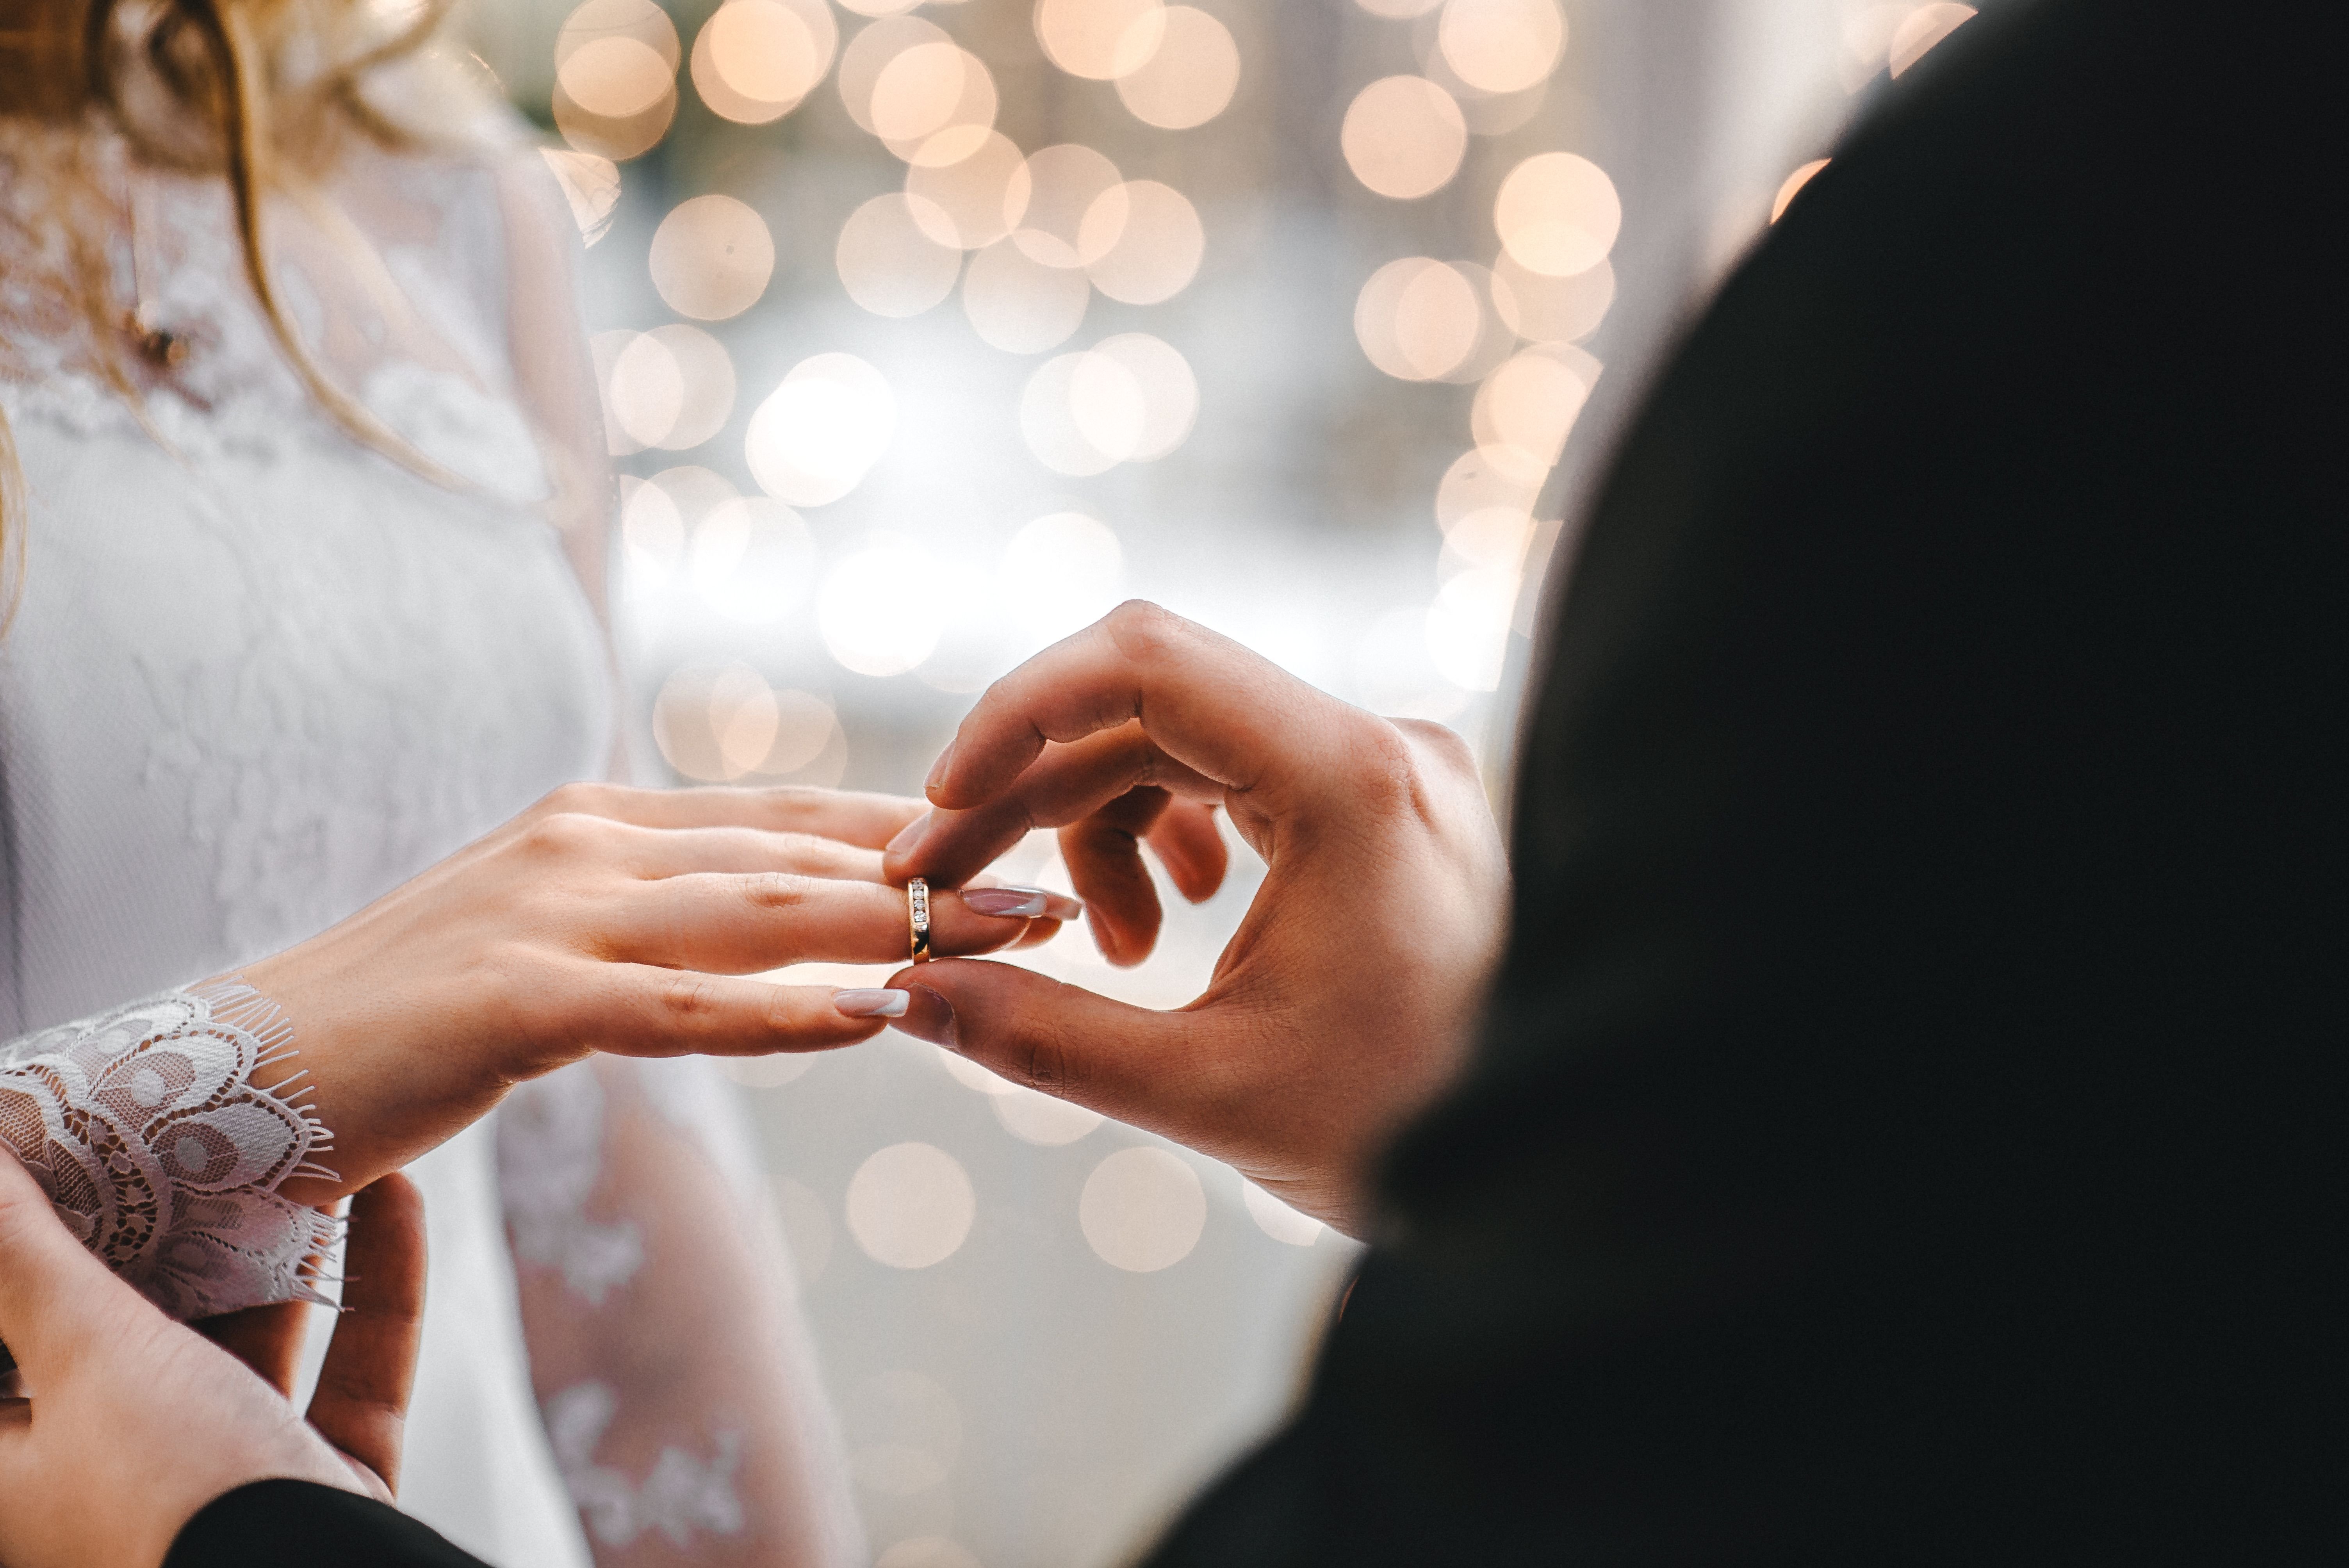 A man places a wedding ring on his bride's finger. | Source: Shutterstock